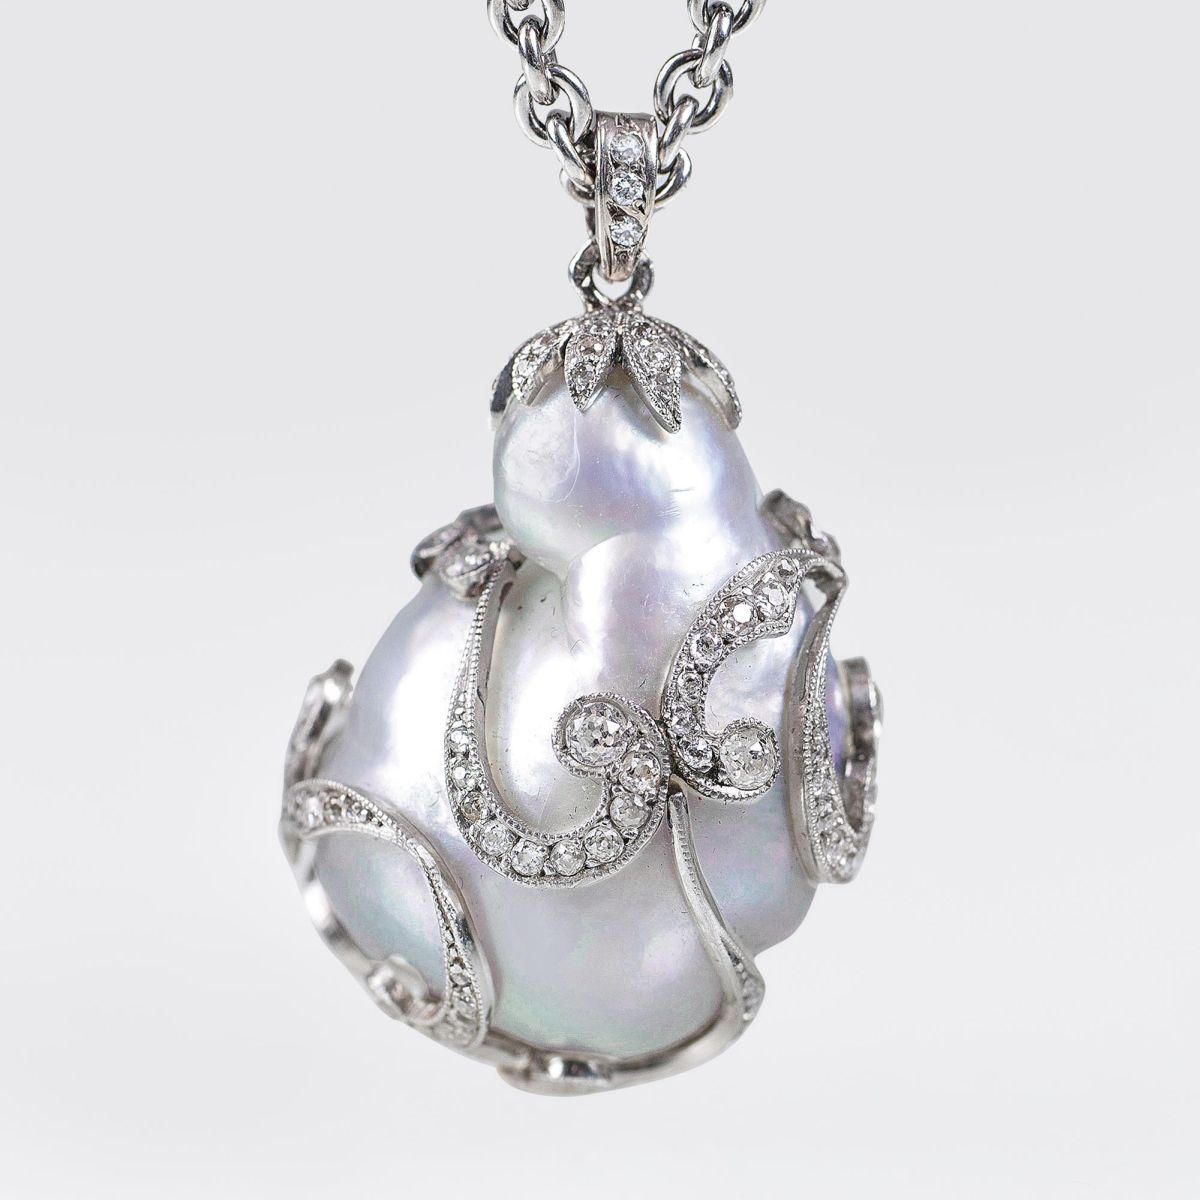 An Art-déco Diamond Pendant with one precious Natural Pearl